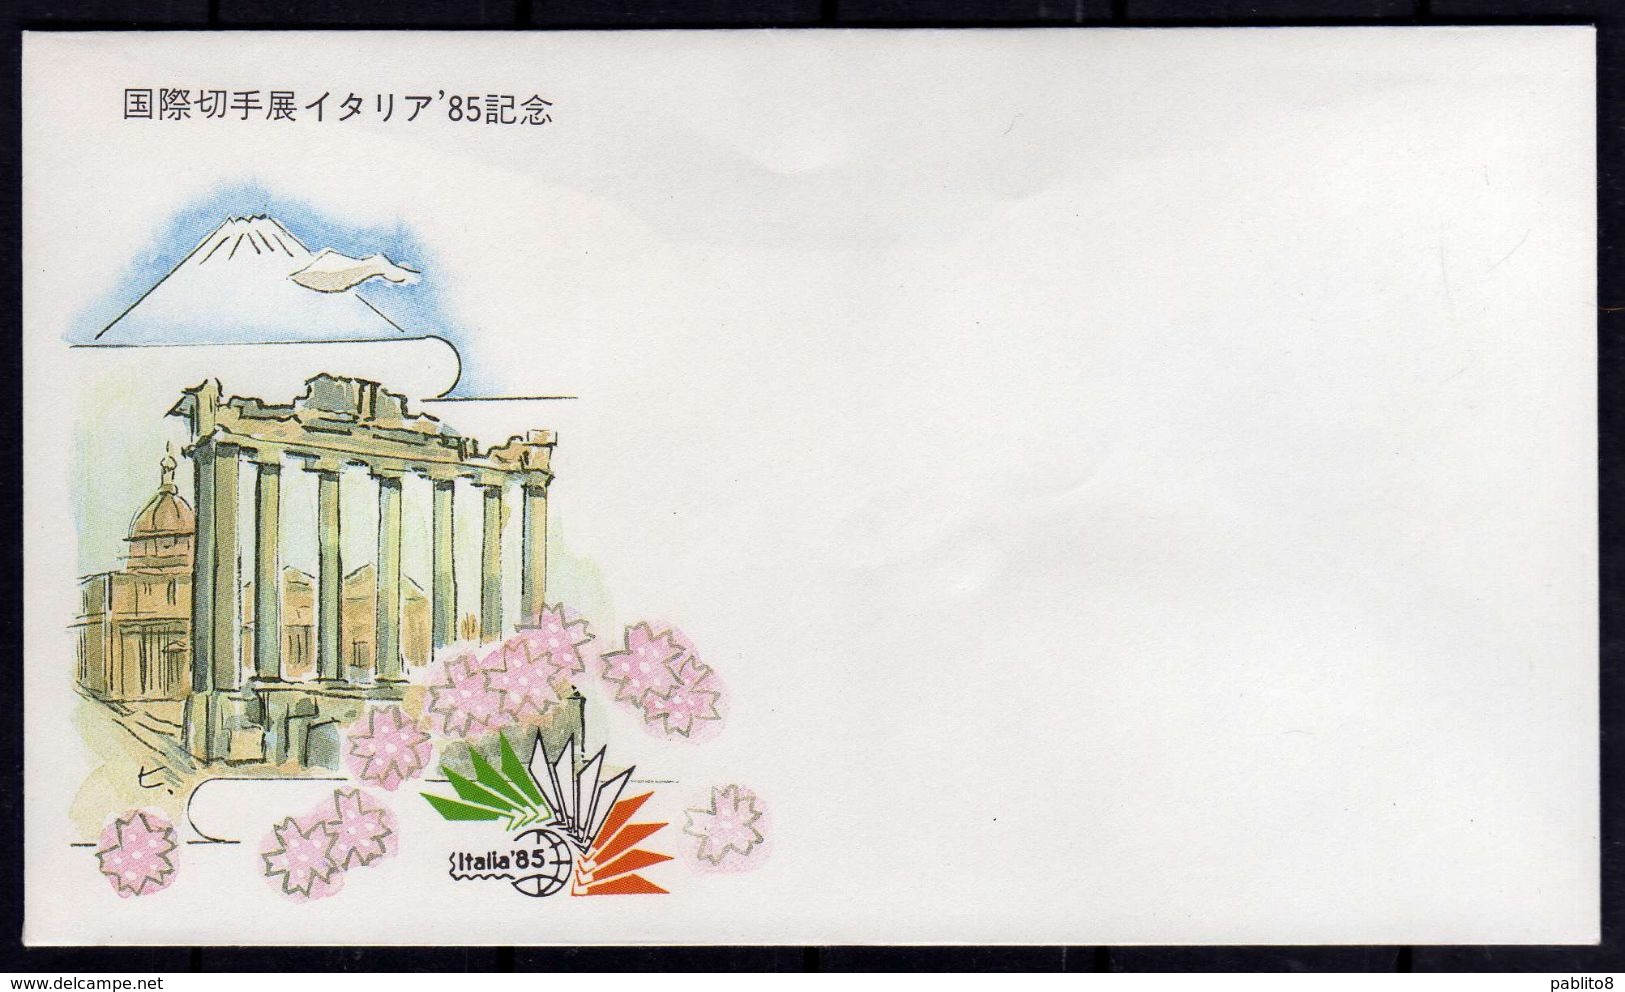 JAPAN NIPPON GIAPPONE JAPON 1985 ITALIA 85 PHILATELIC EXHIBITION STAMP ESPOSITION POSTAL ENTIRE COVER UNUSED - Briefe